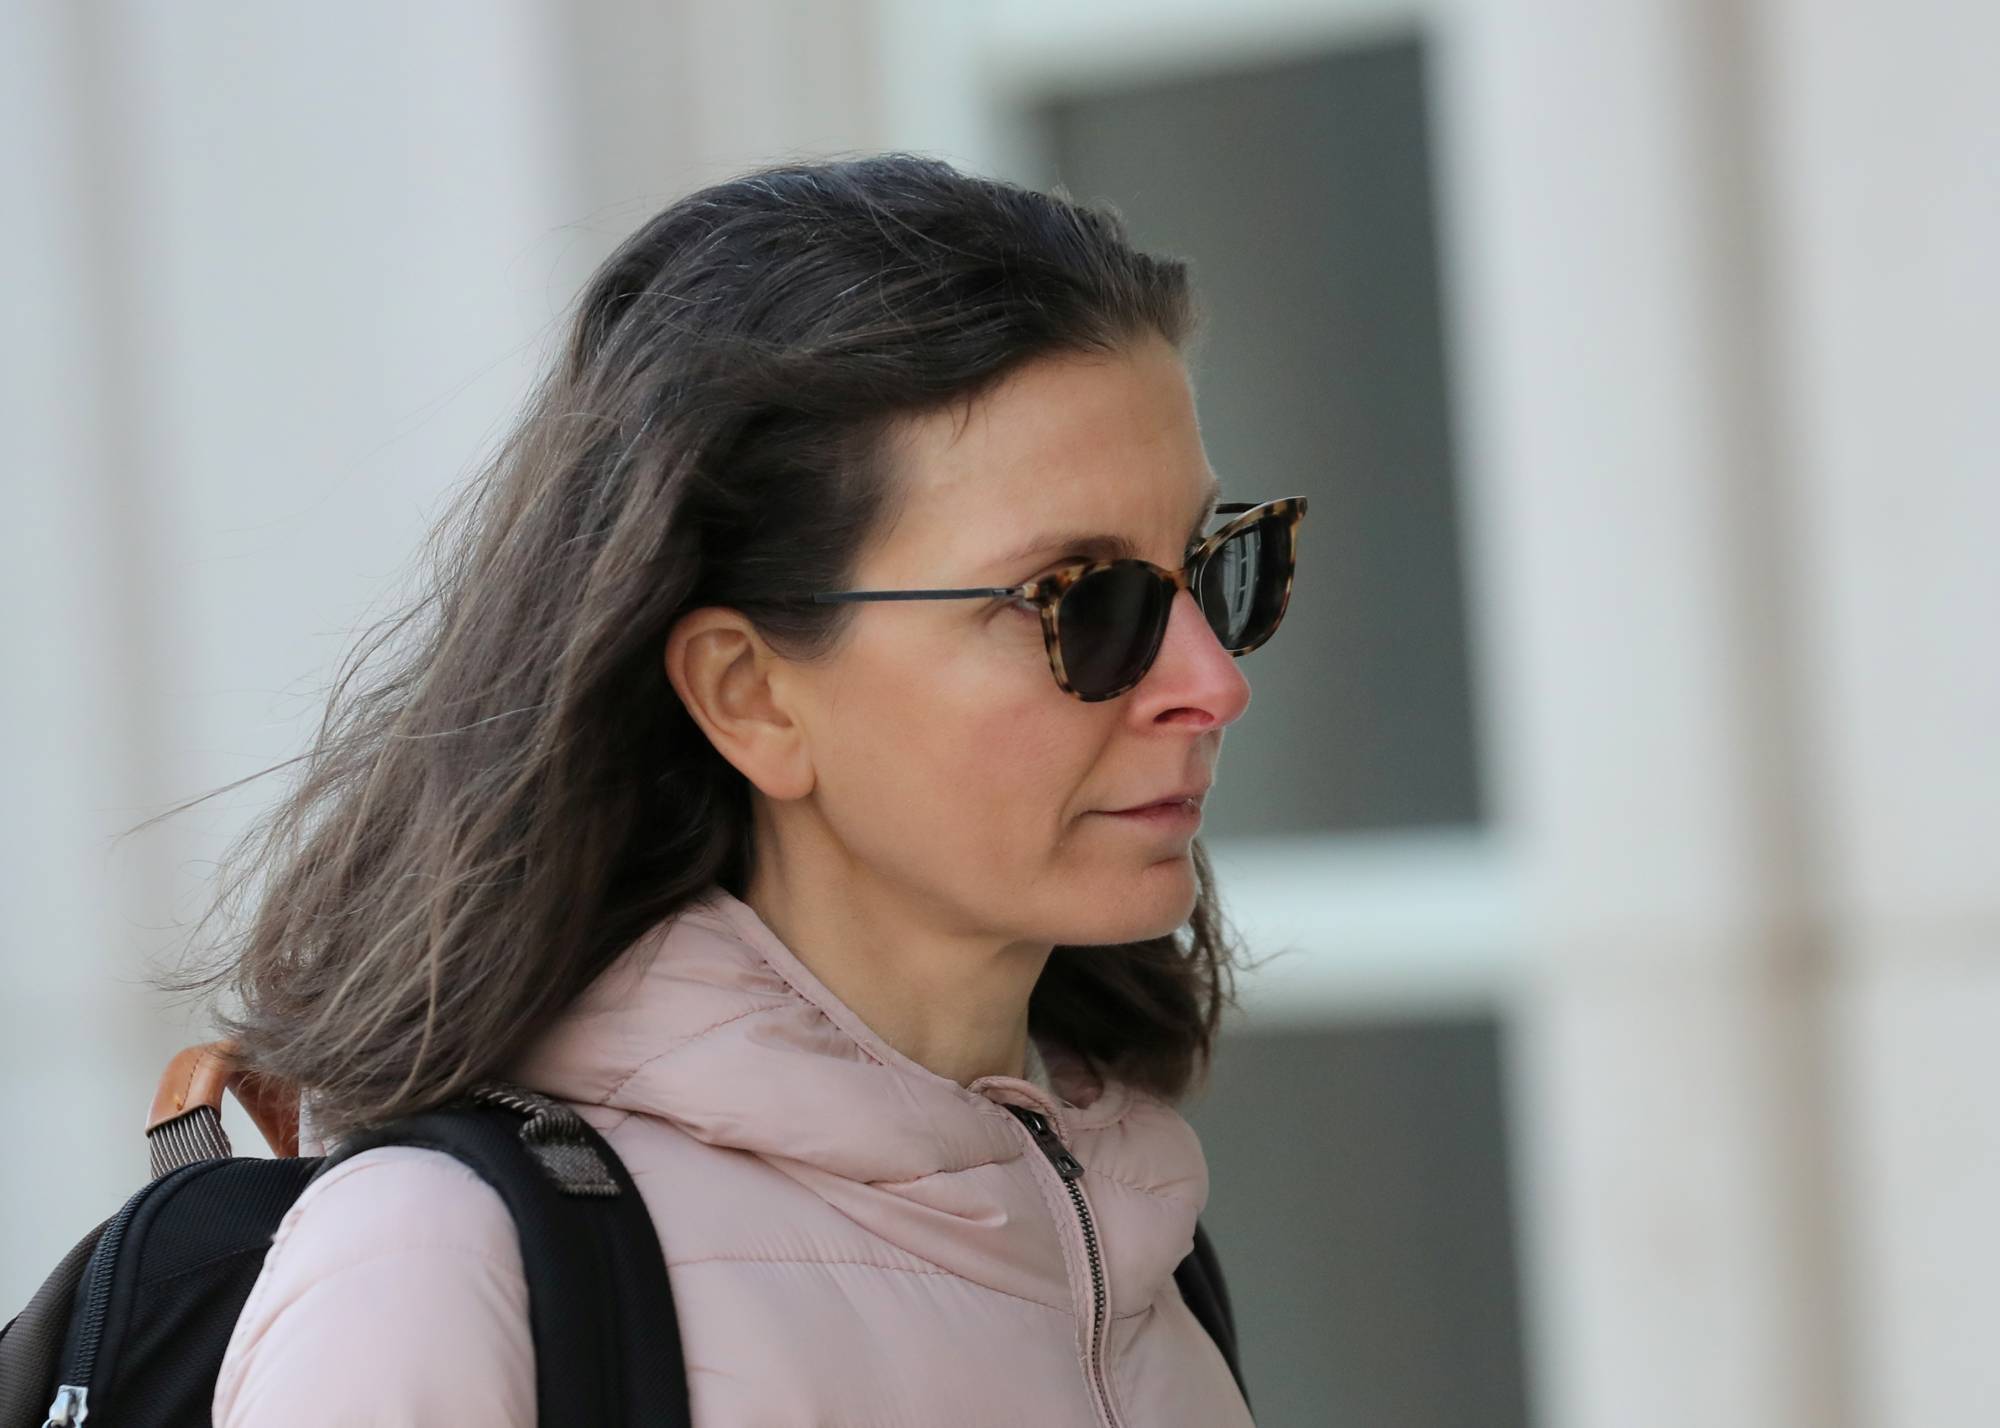 Seagram liquor heiress gets 81 months for role in Nxivm sex cult